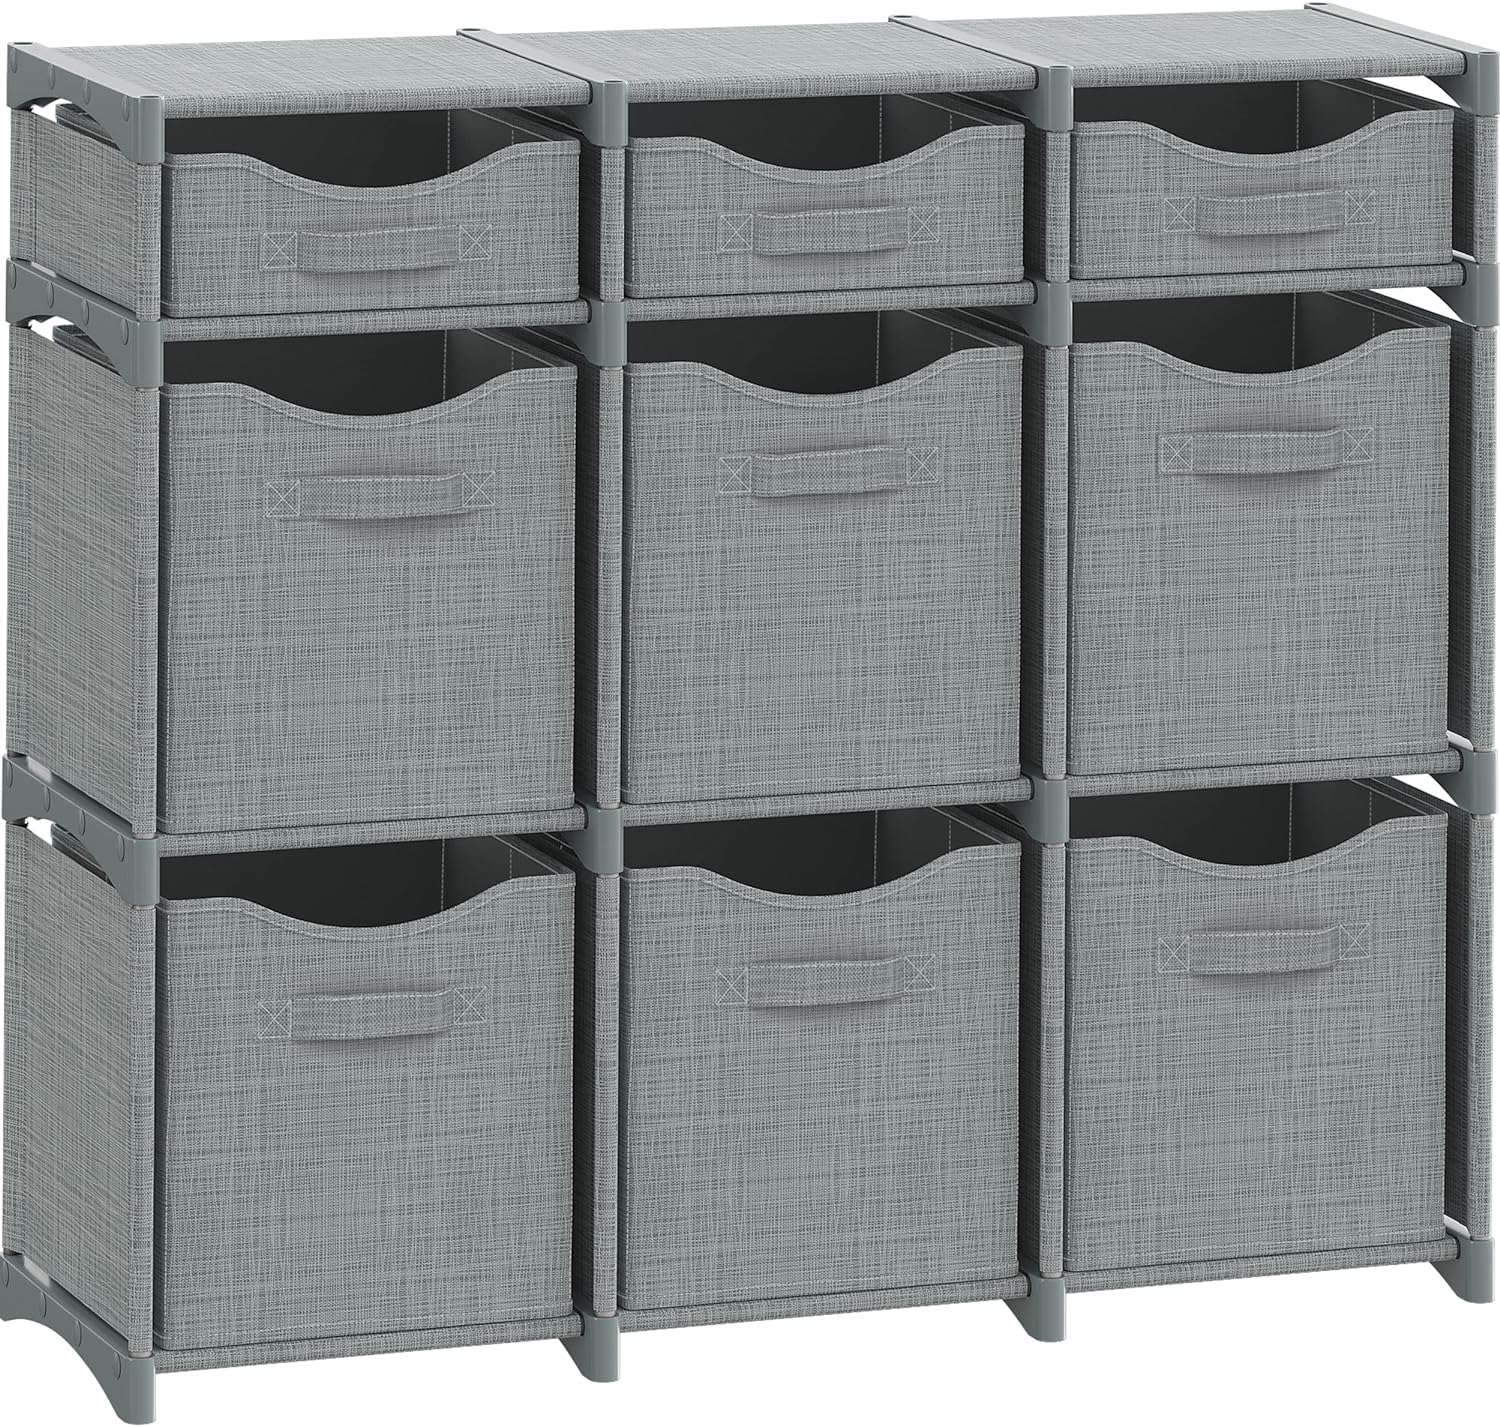 Neaterize 9 Cube Closet Organizers And Storage | Includes All Storage Cube Bins | Easy To Assemble Closet Storage Unit With Drawers | Roo